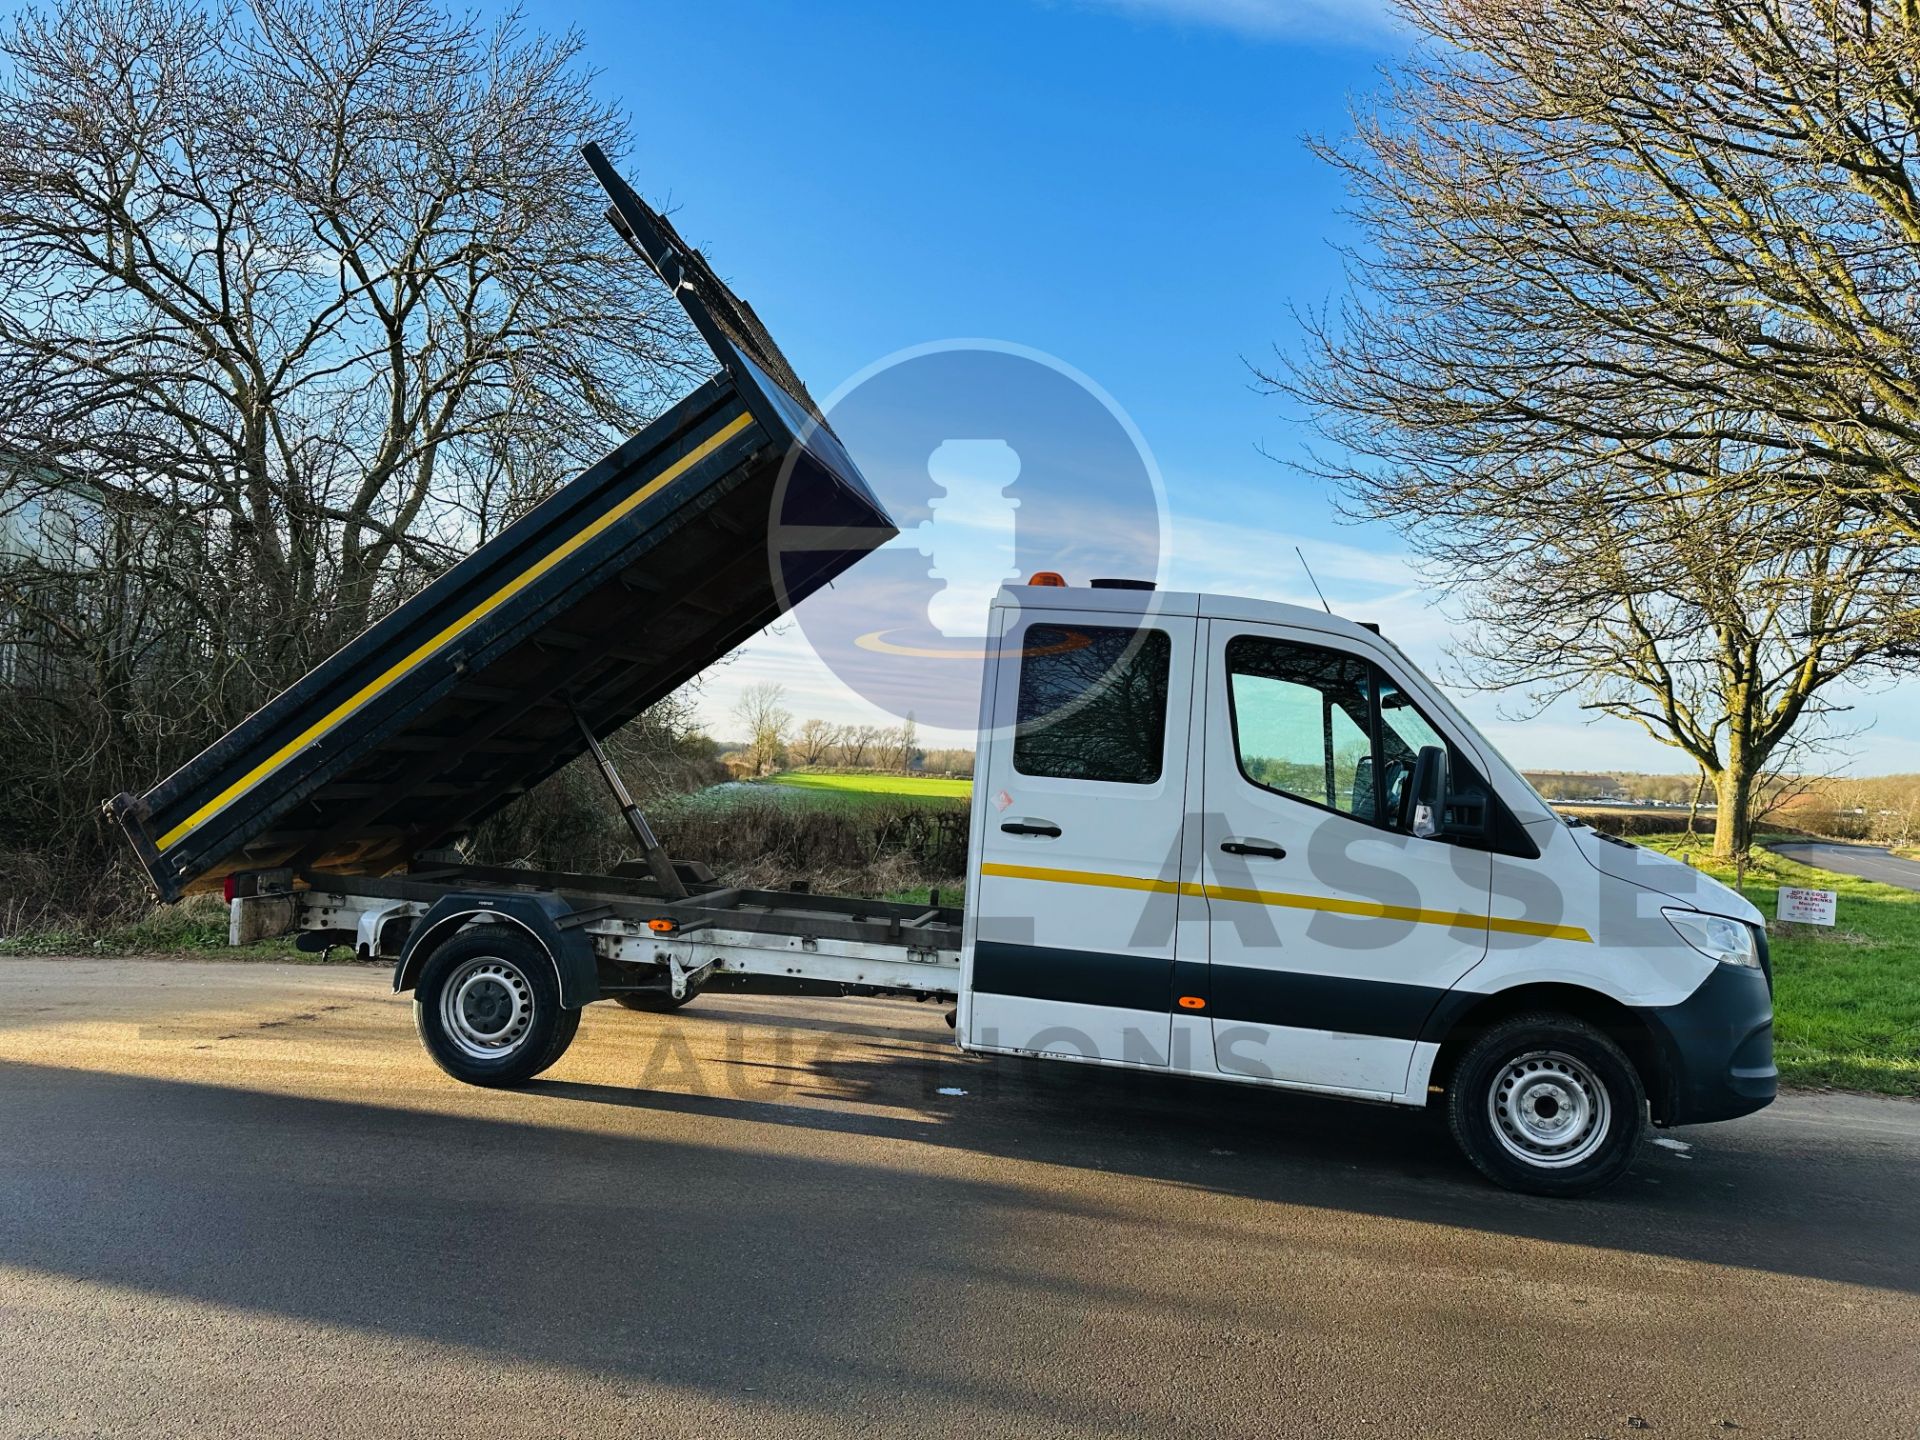 MERCEDES-BENZ SPRINTER 316 CDI *LWB - DOUBLE CAB TIPPER* (2021 - EURO 6) 141 BHP - 6 SPEED (3500 KG) - Image 12 of 28